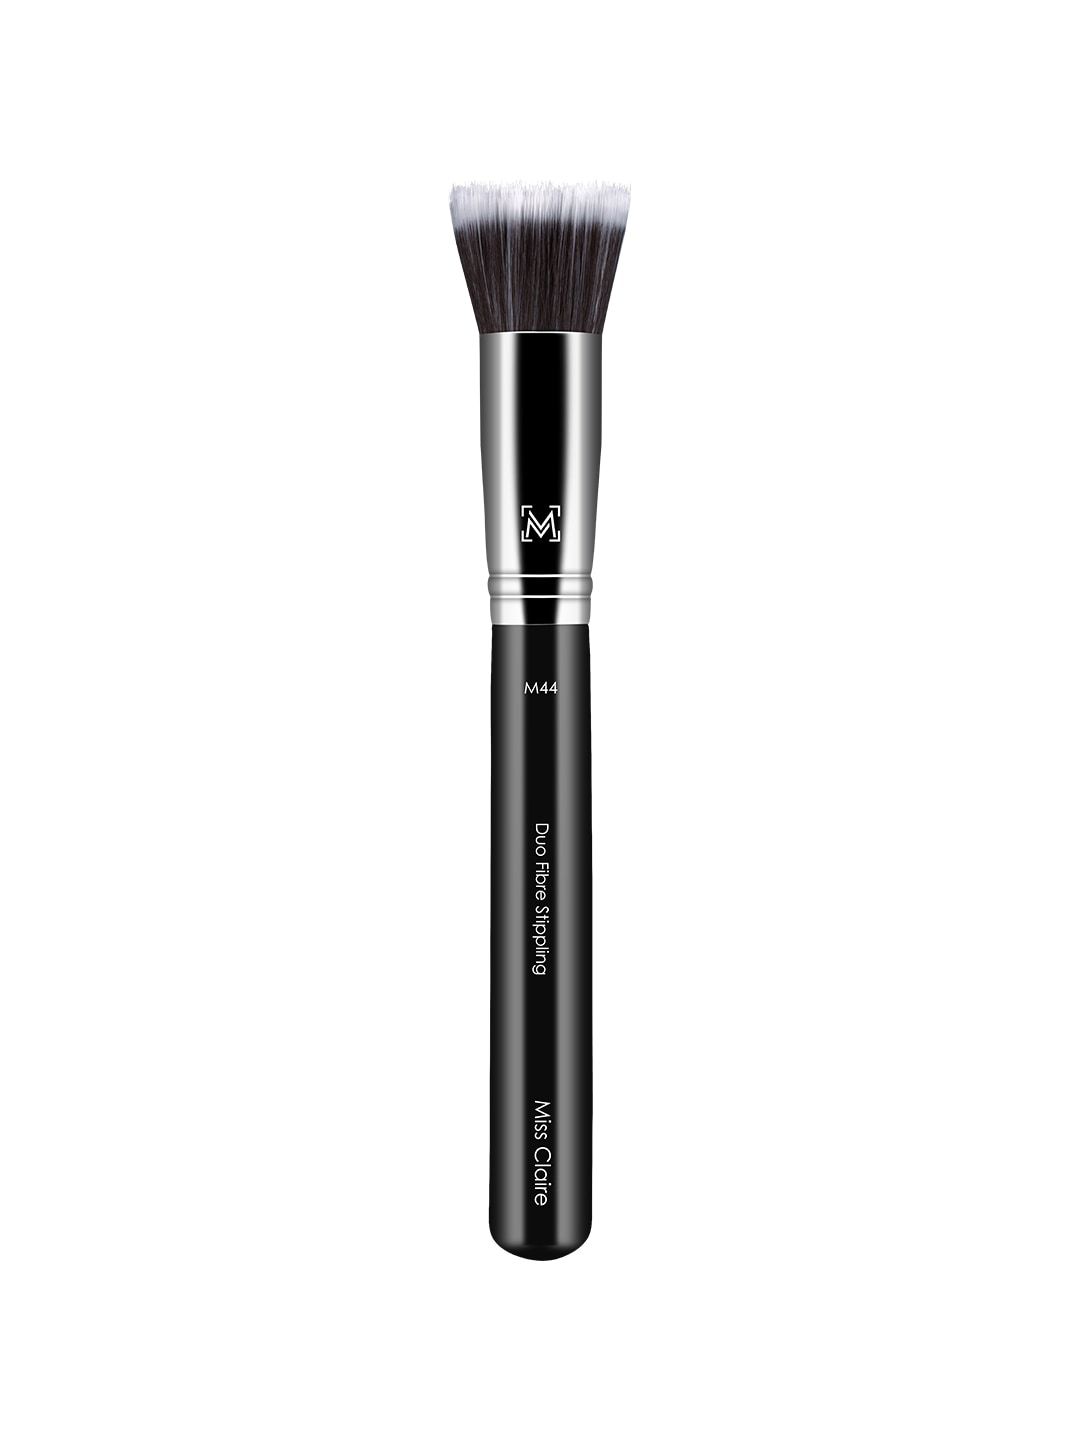 Miss Claire Chrome Duo Fibre Stippling Brush - M44 Black & Silver Toned Price in India